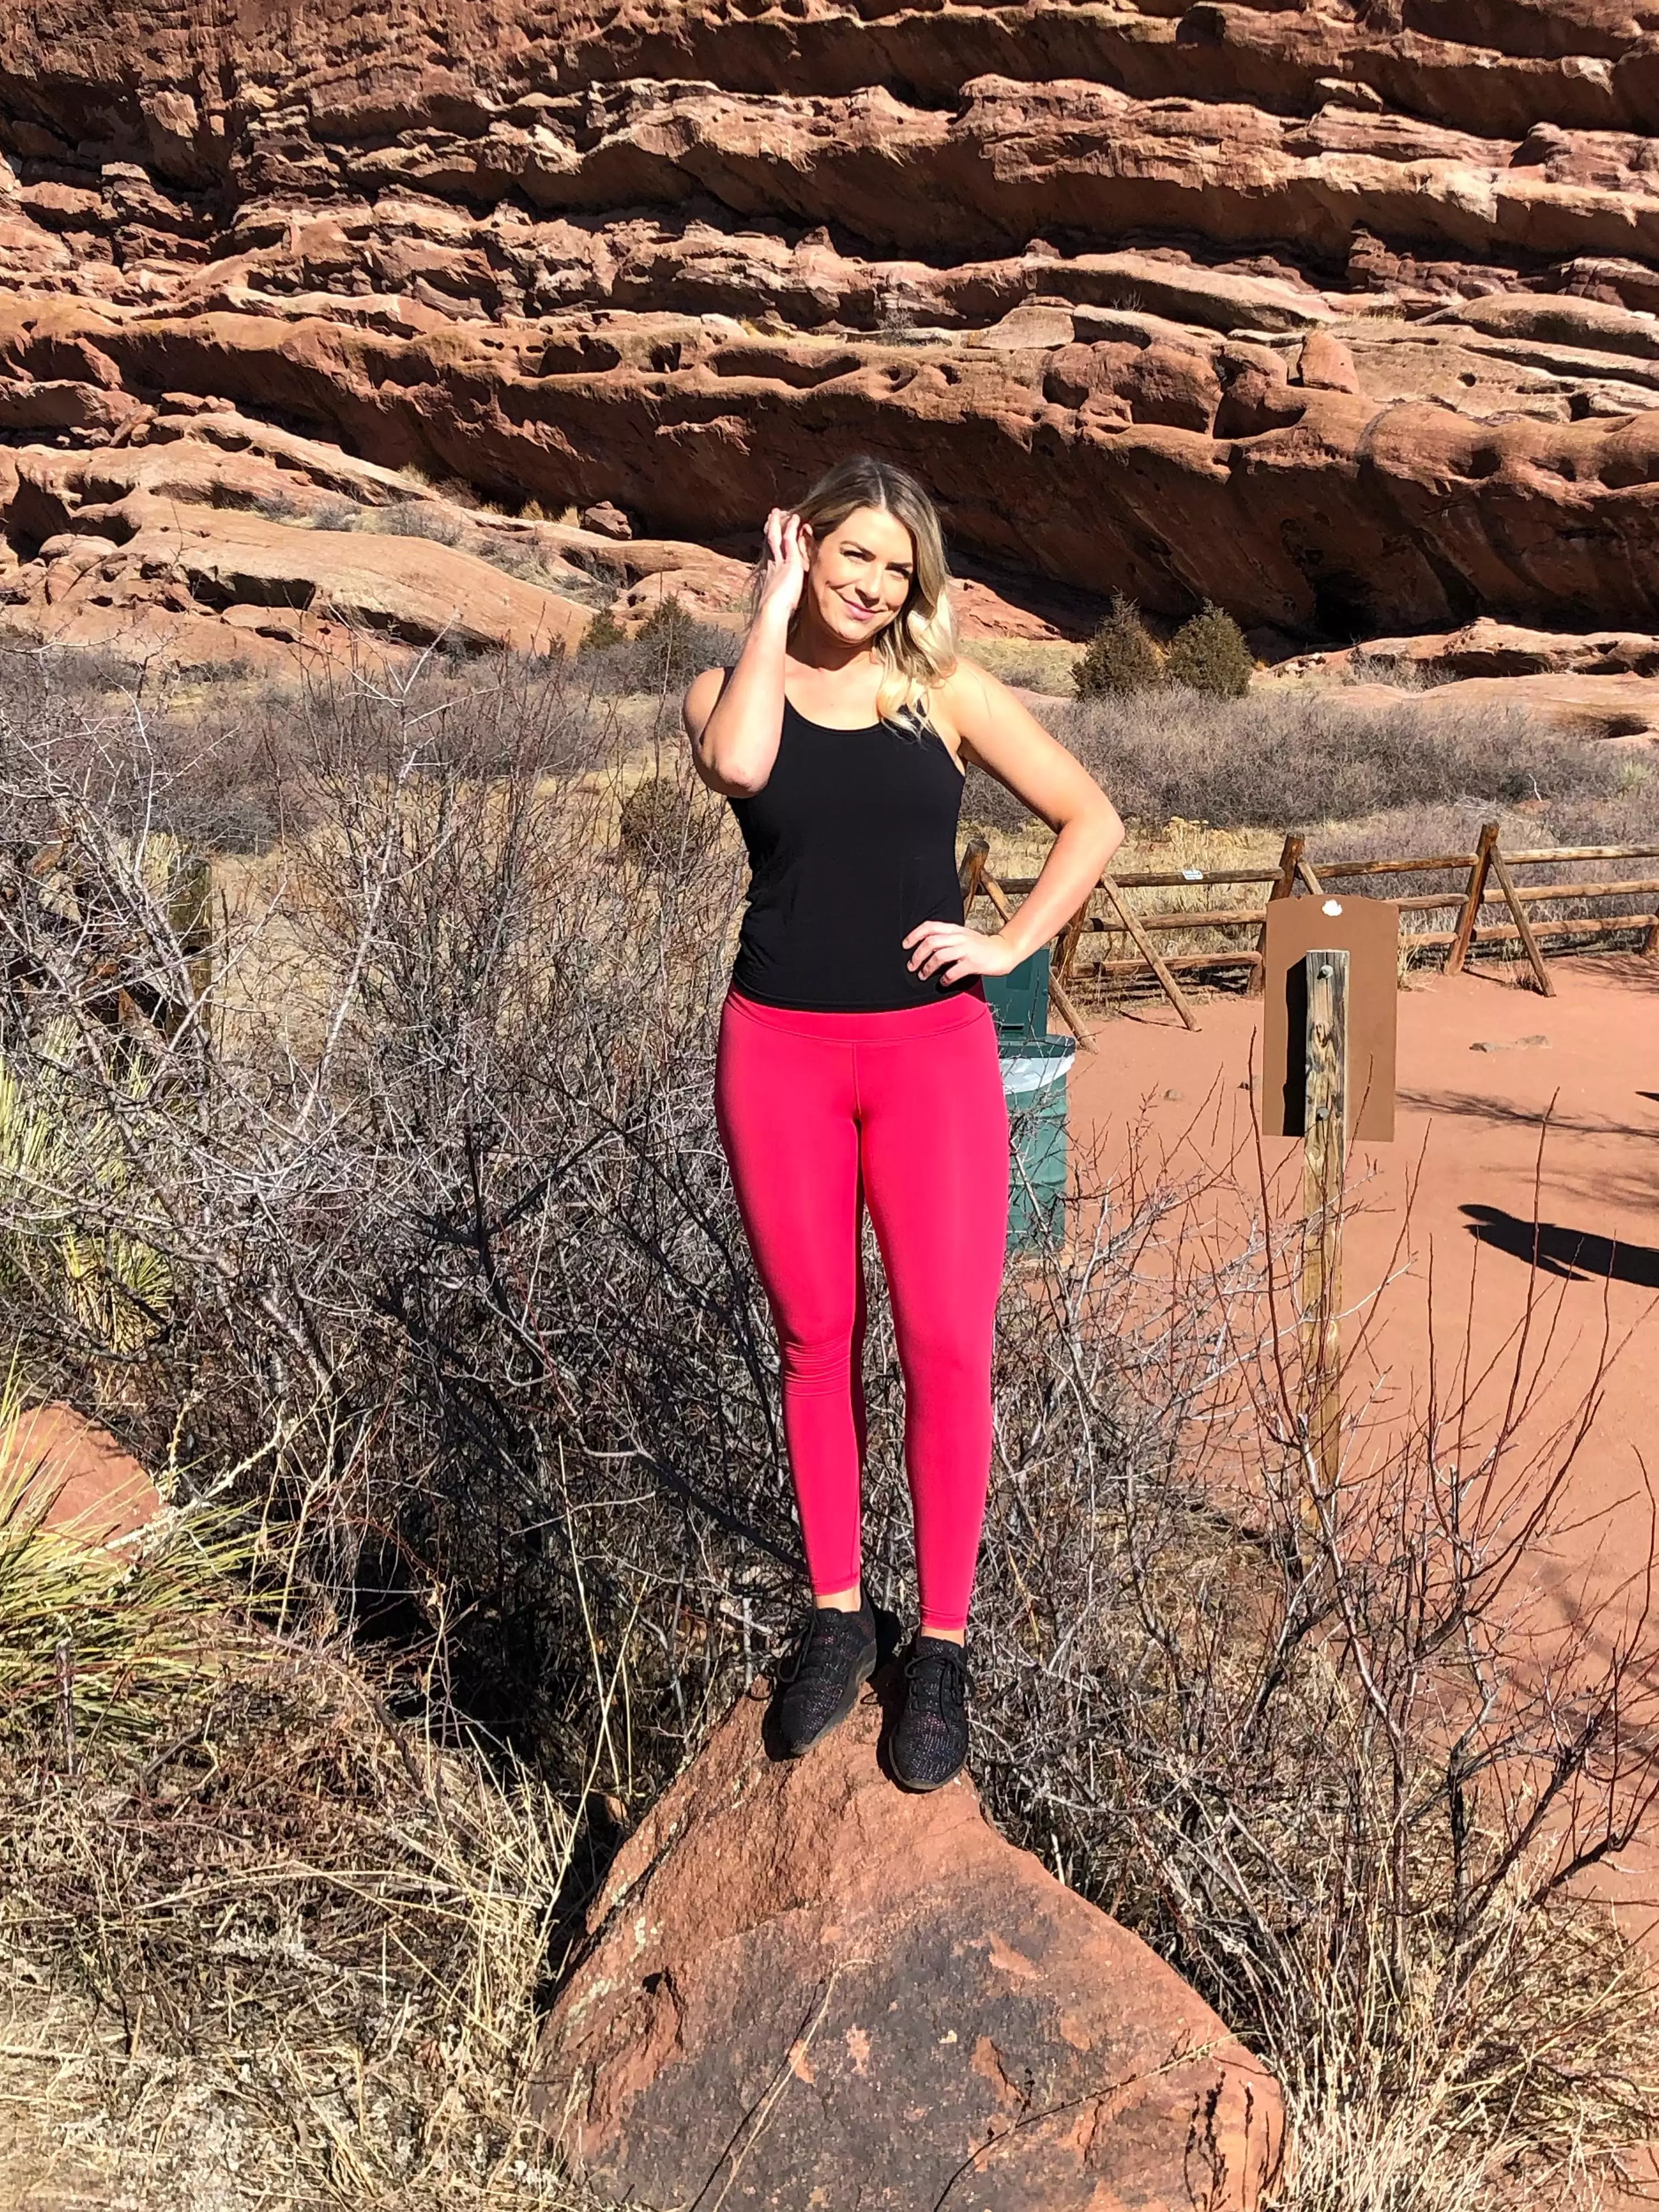 When Katlyn Gardenshire found herself at a loose end in Denver, she booked an Uber to the Red Rock Trails (